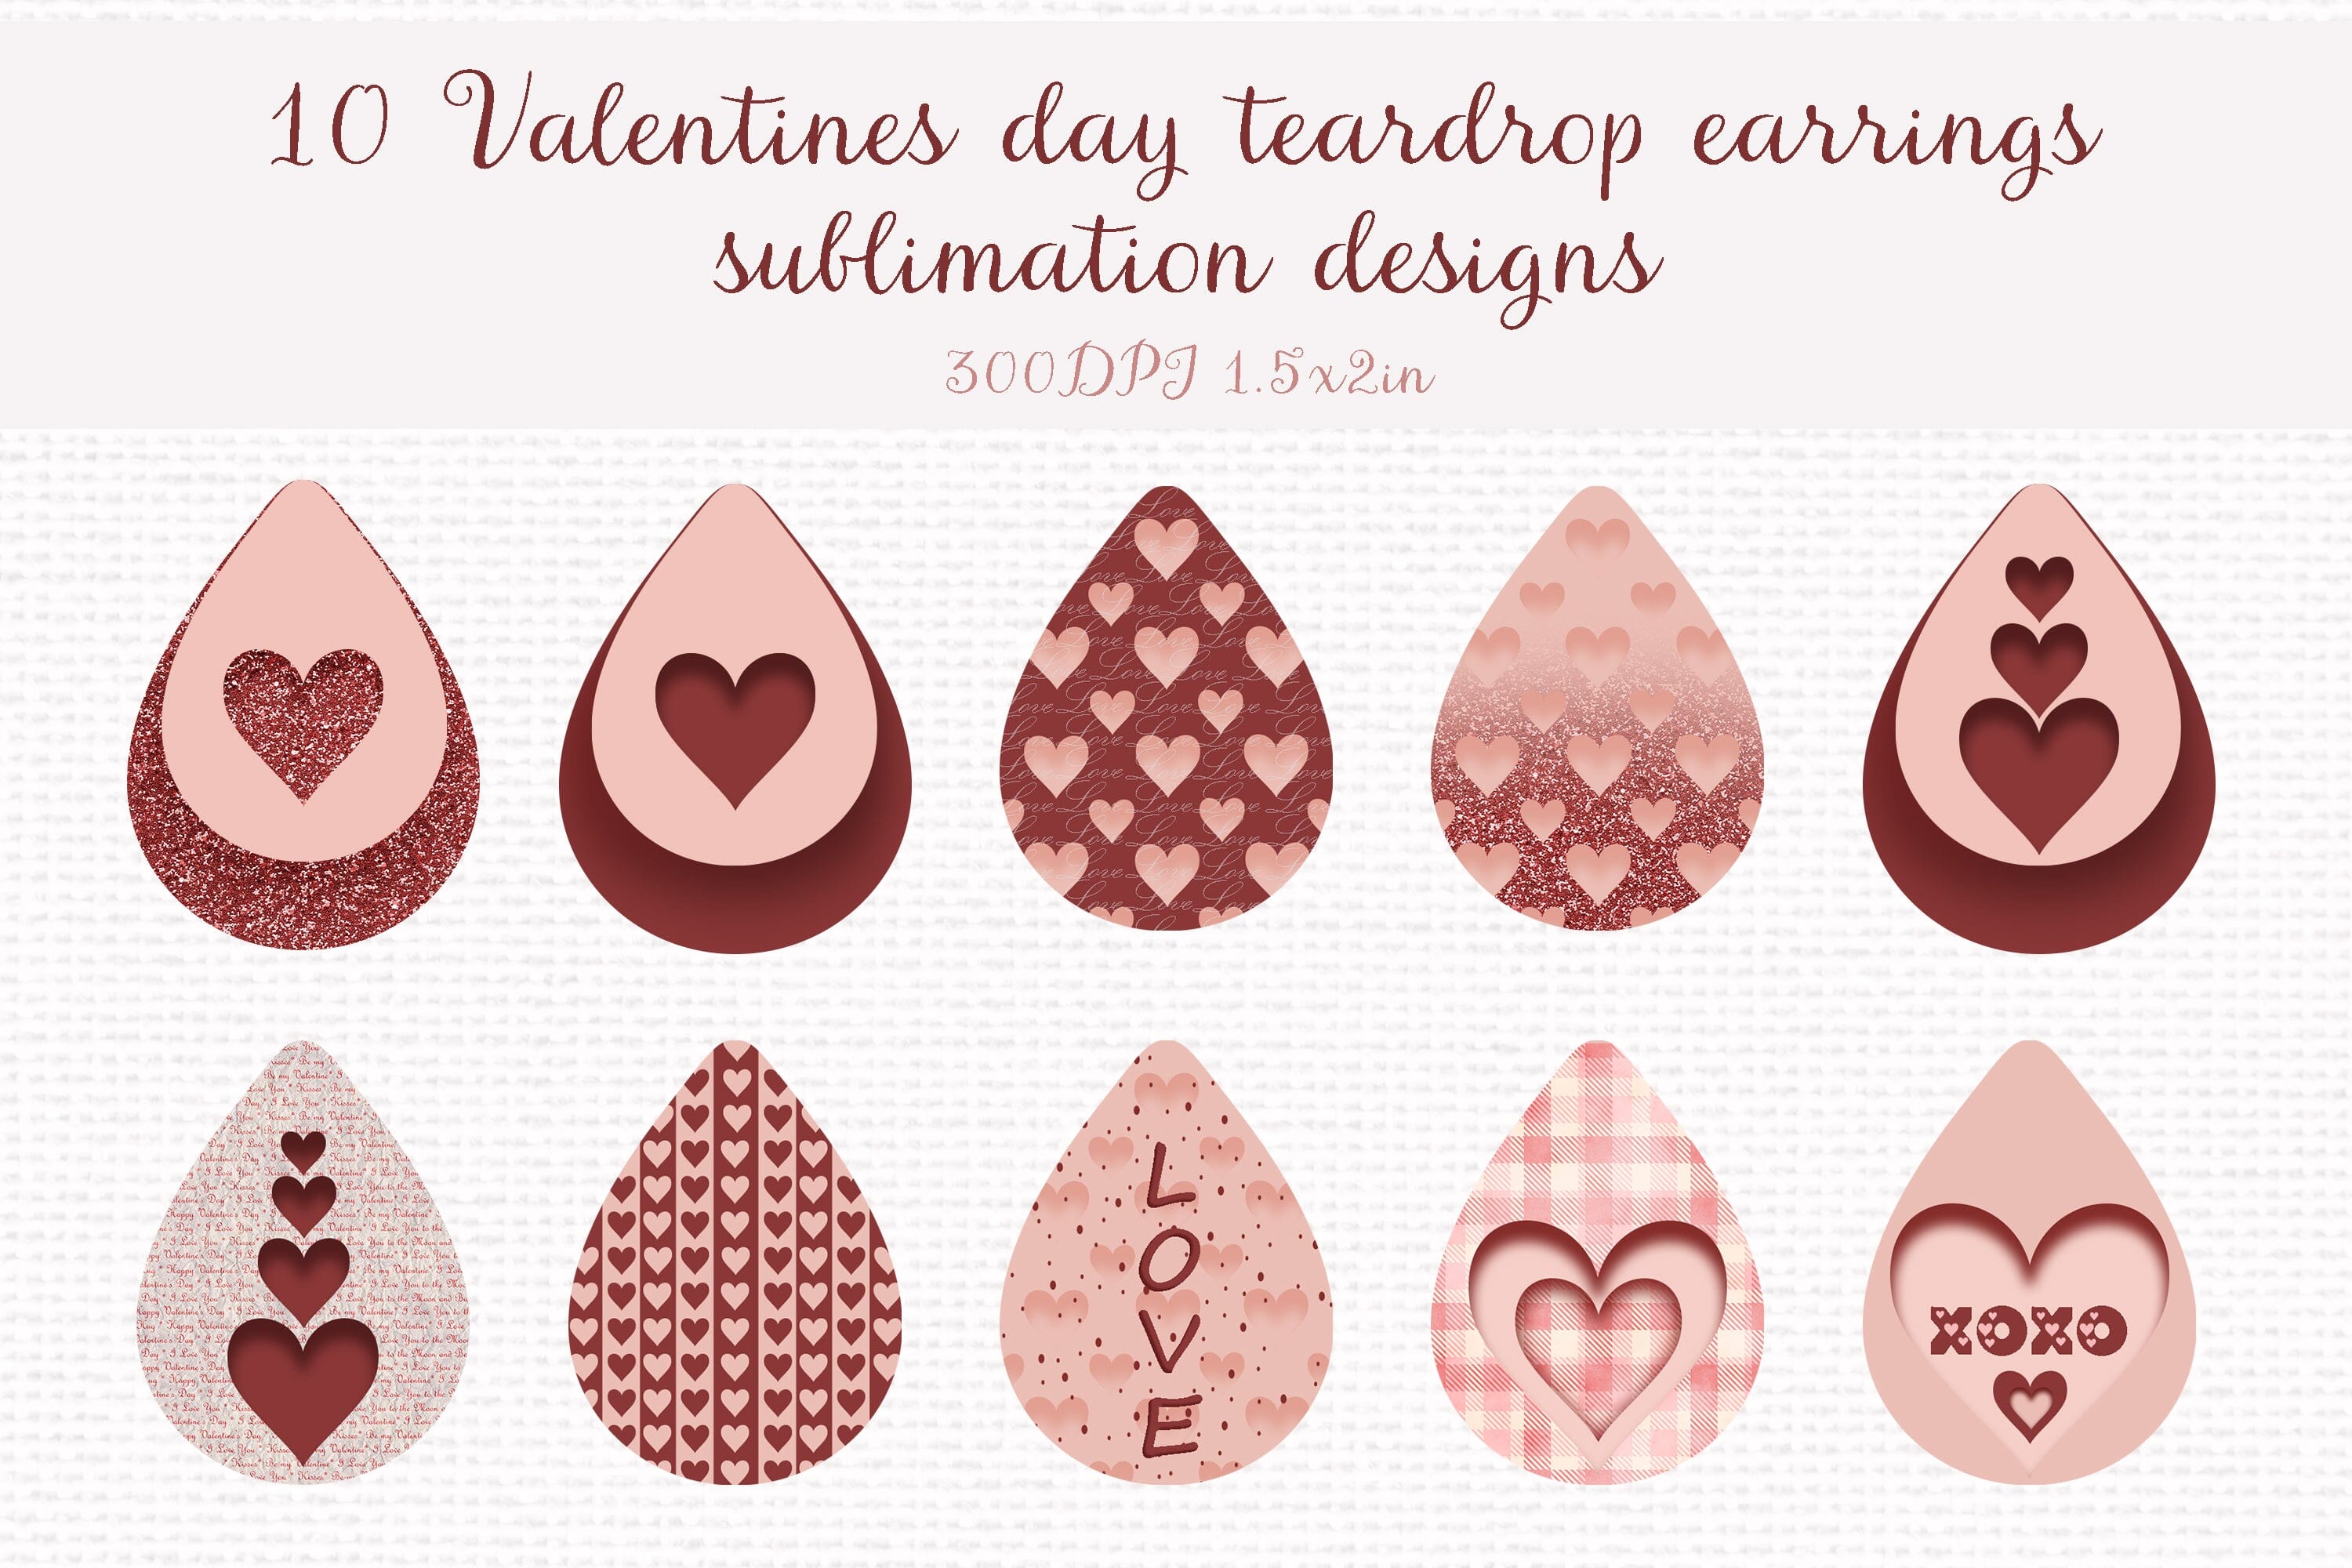 Teardrop Valentines Earrings Sublimation Graphic by Happy Printables Club ·  Creative Fabrica